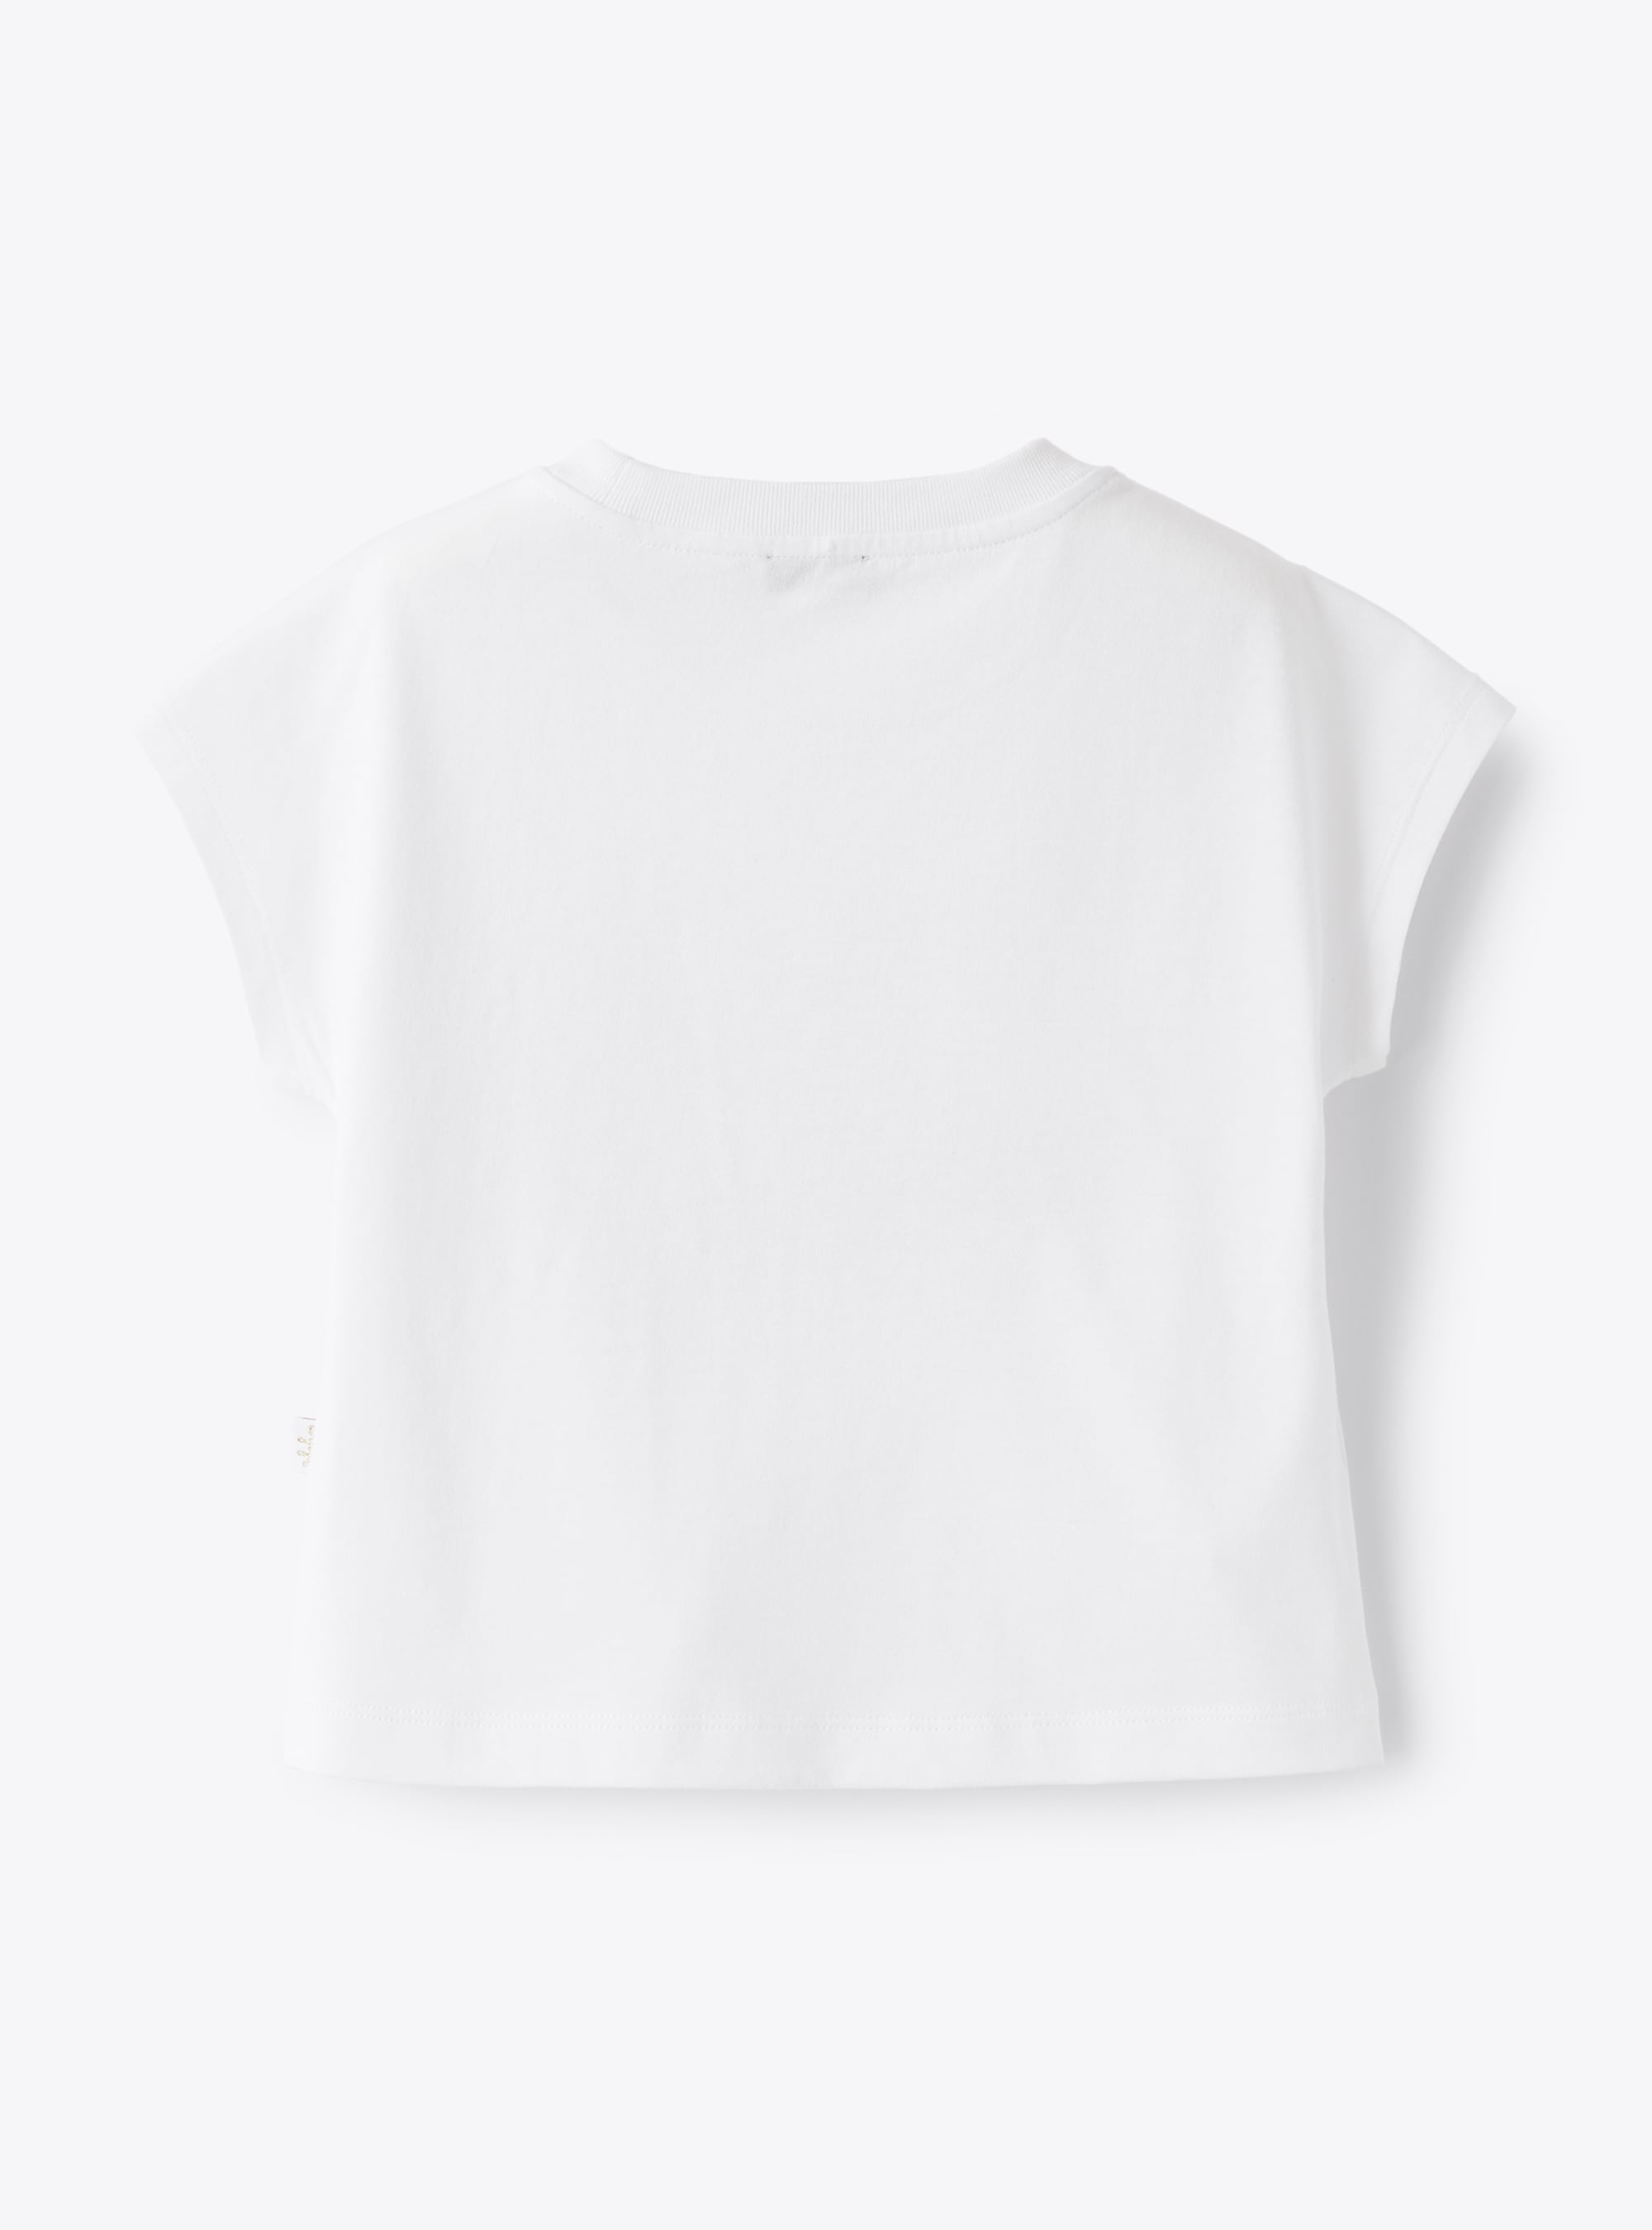 White t-shirt with print of little girl - White | Il Gufo